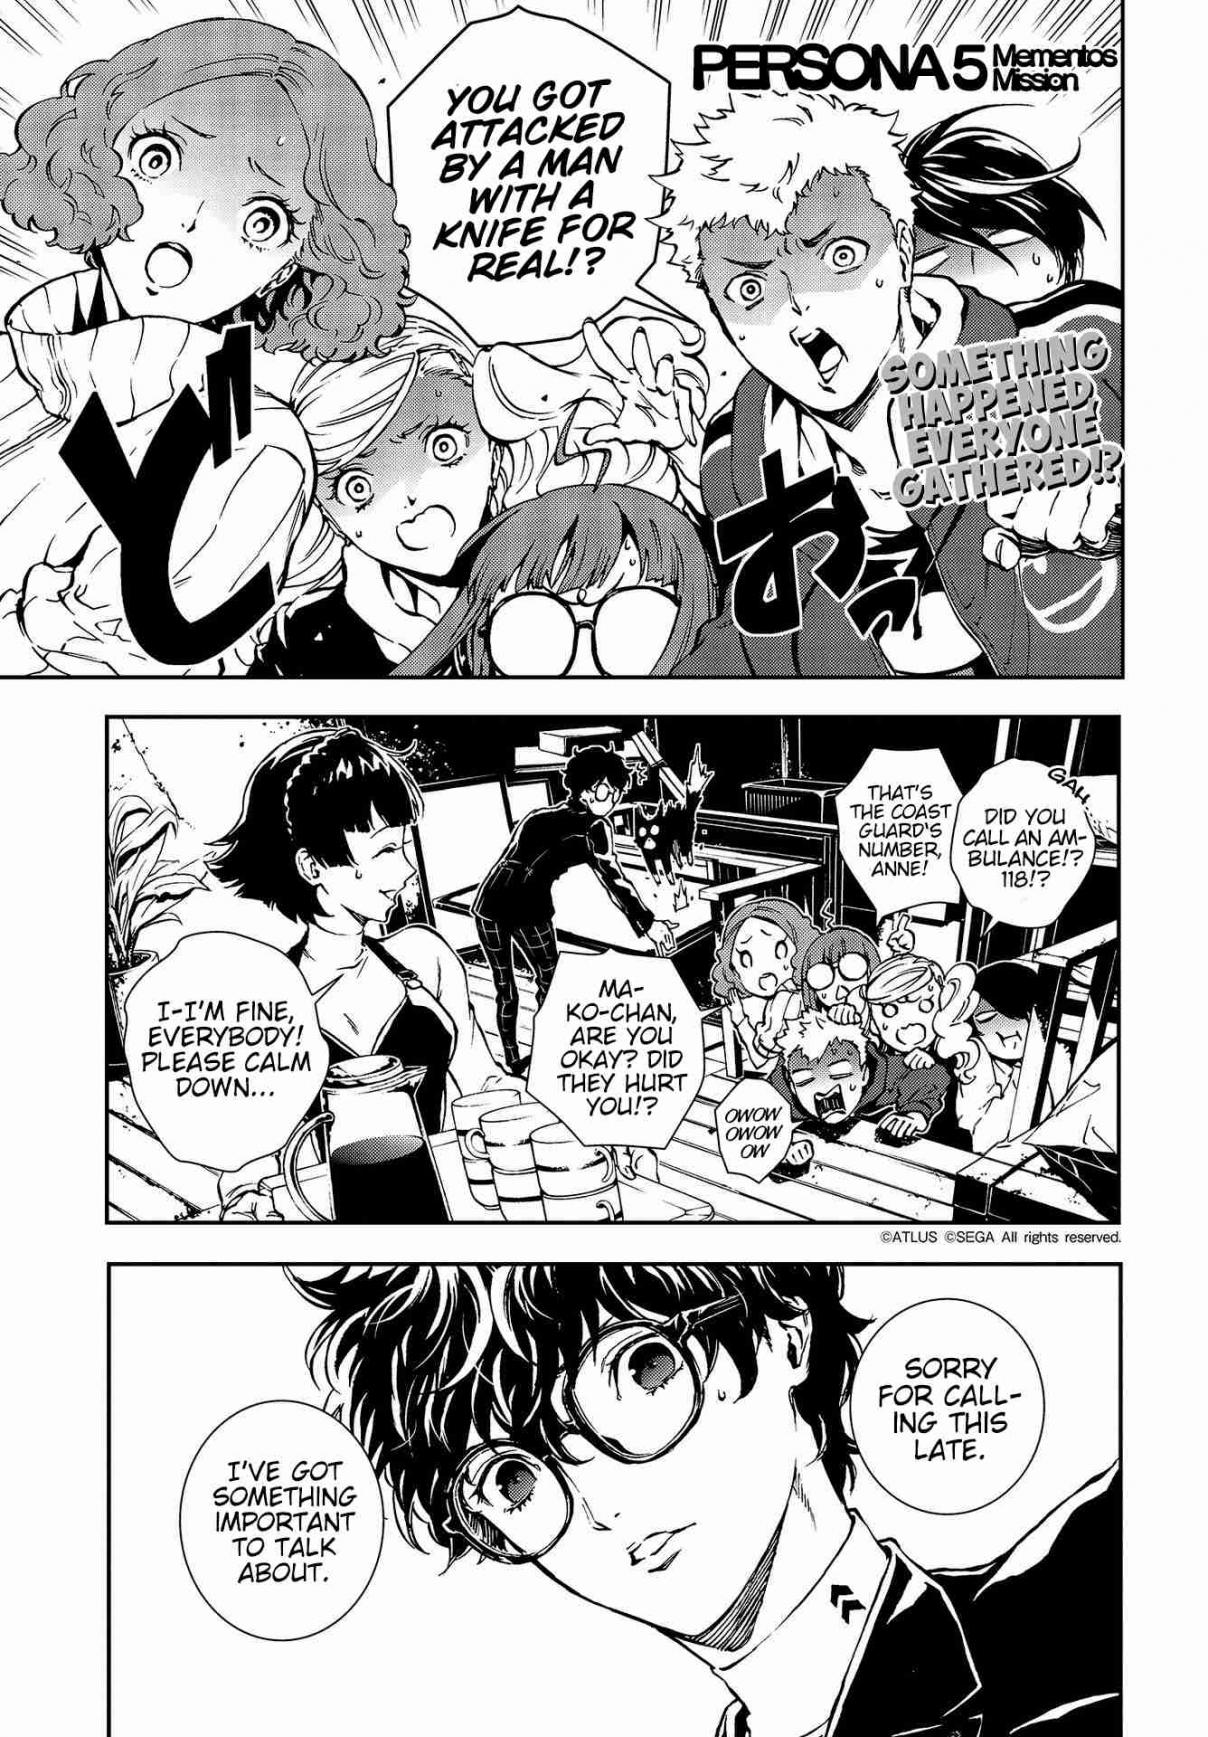 Persona 5 Mementos Mission Vol. 2 Ch. 11 In the Black of Night